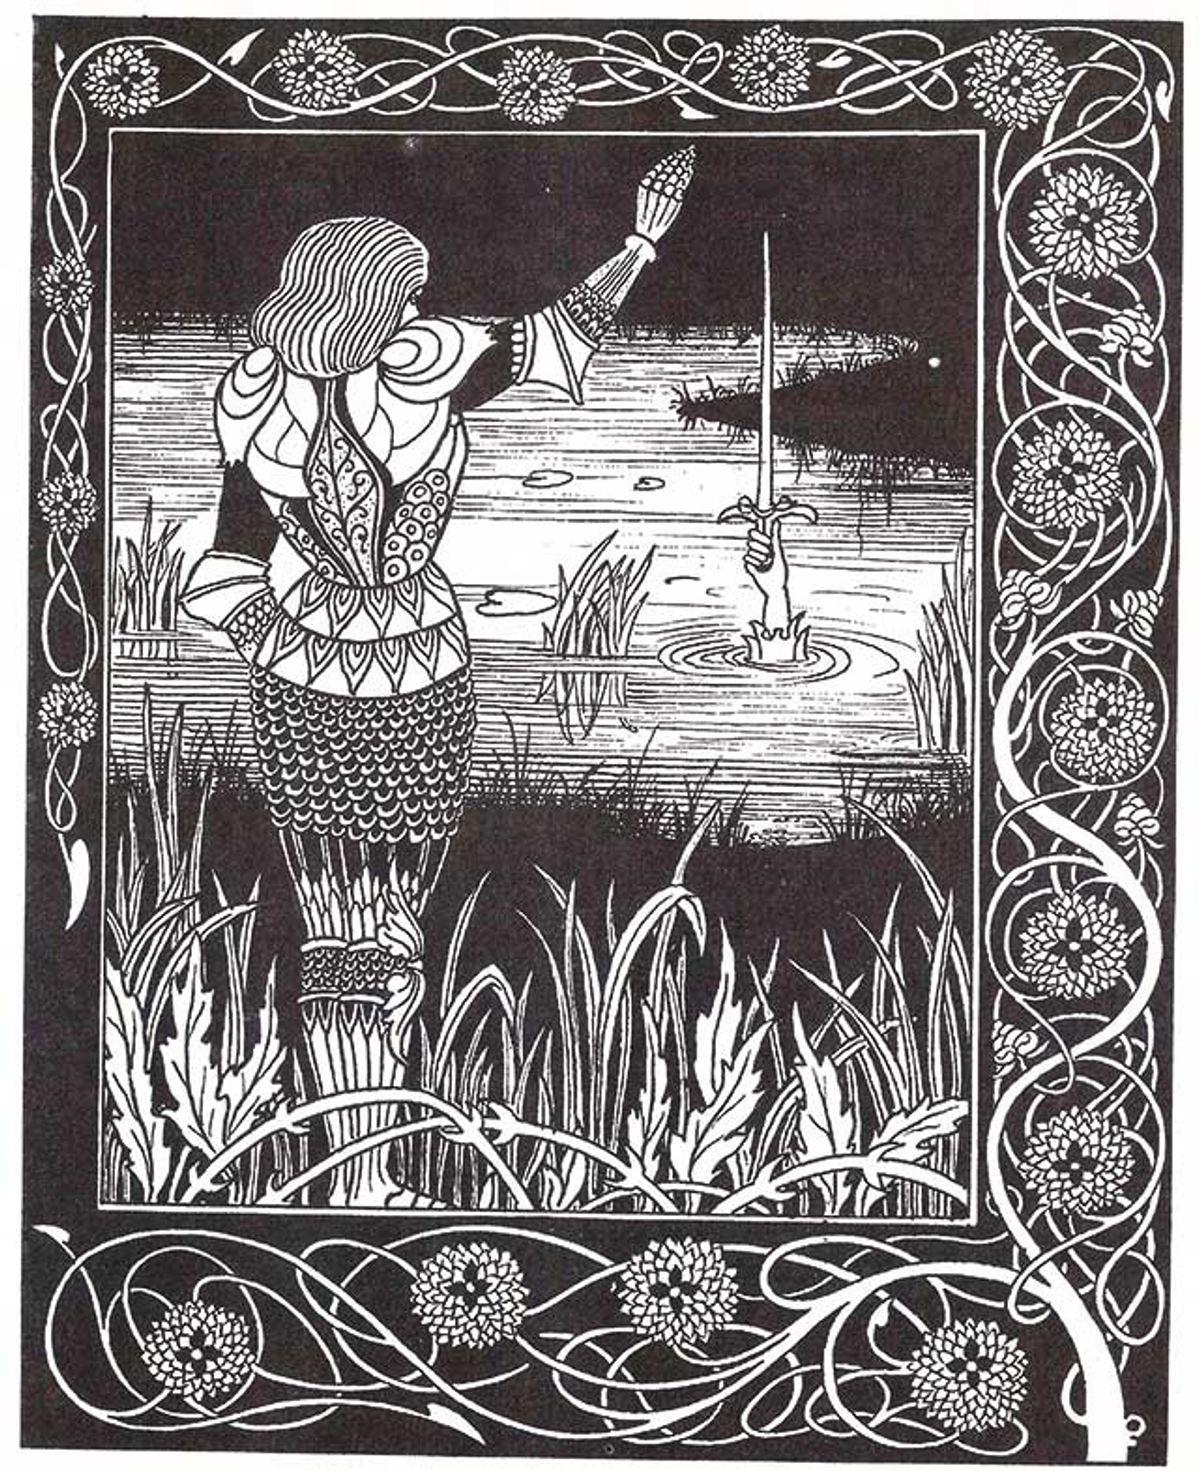 How Sir Bedivere Cast the Sword Excalibur into the Water (1893-94), an illustration by Aubrey Beardsley for Thomas Malory’s 15th-century Le Morte d’Arthur

Photo: Ghost Archives



